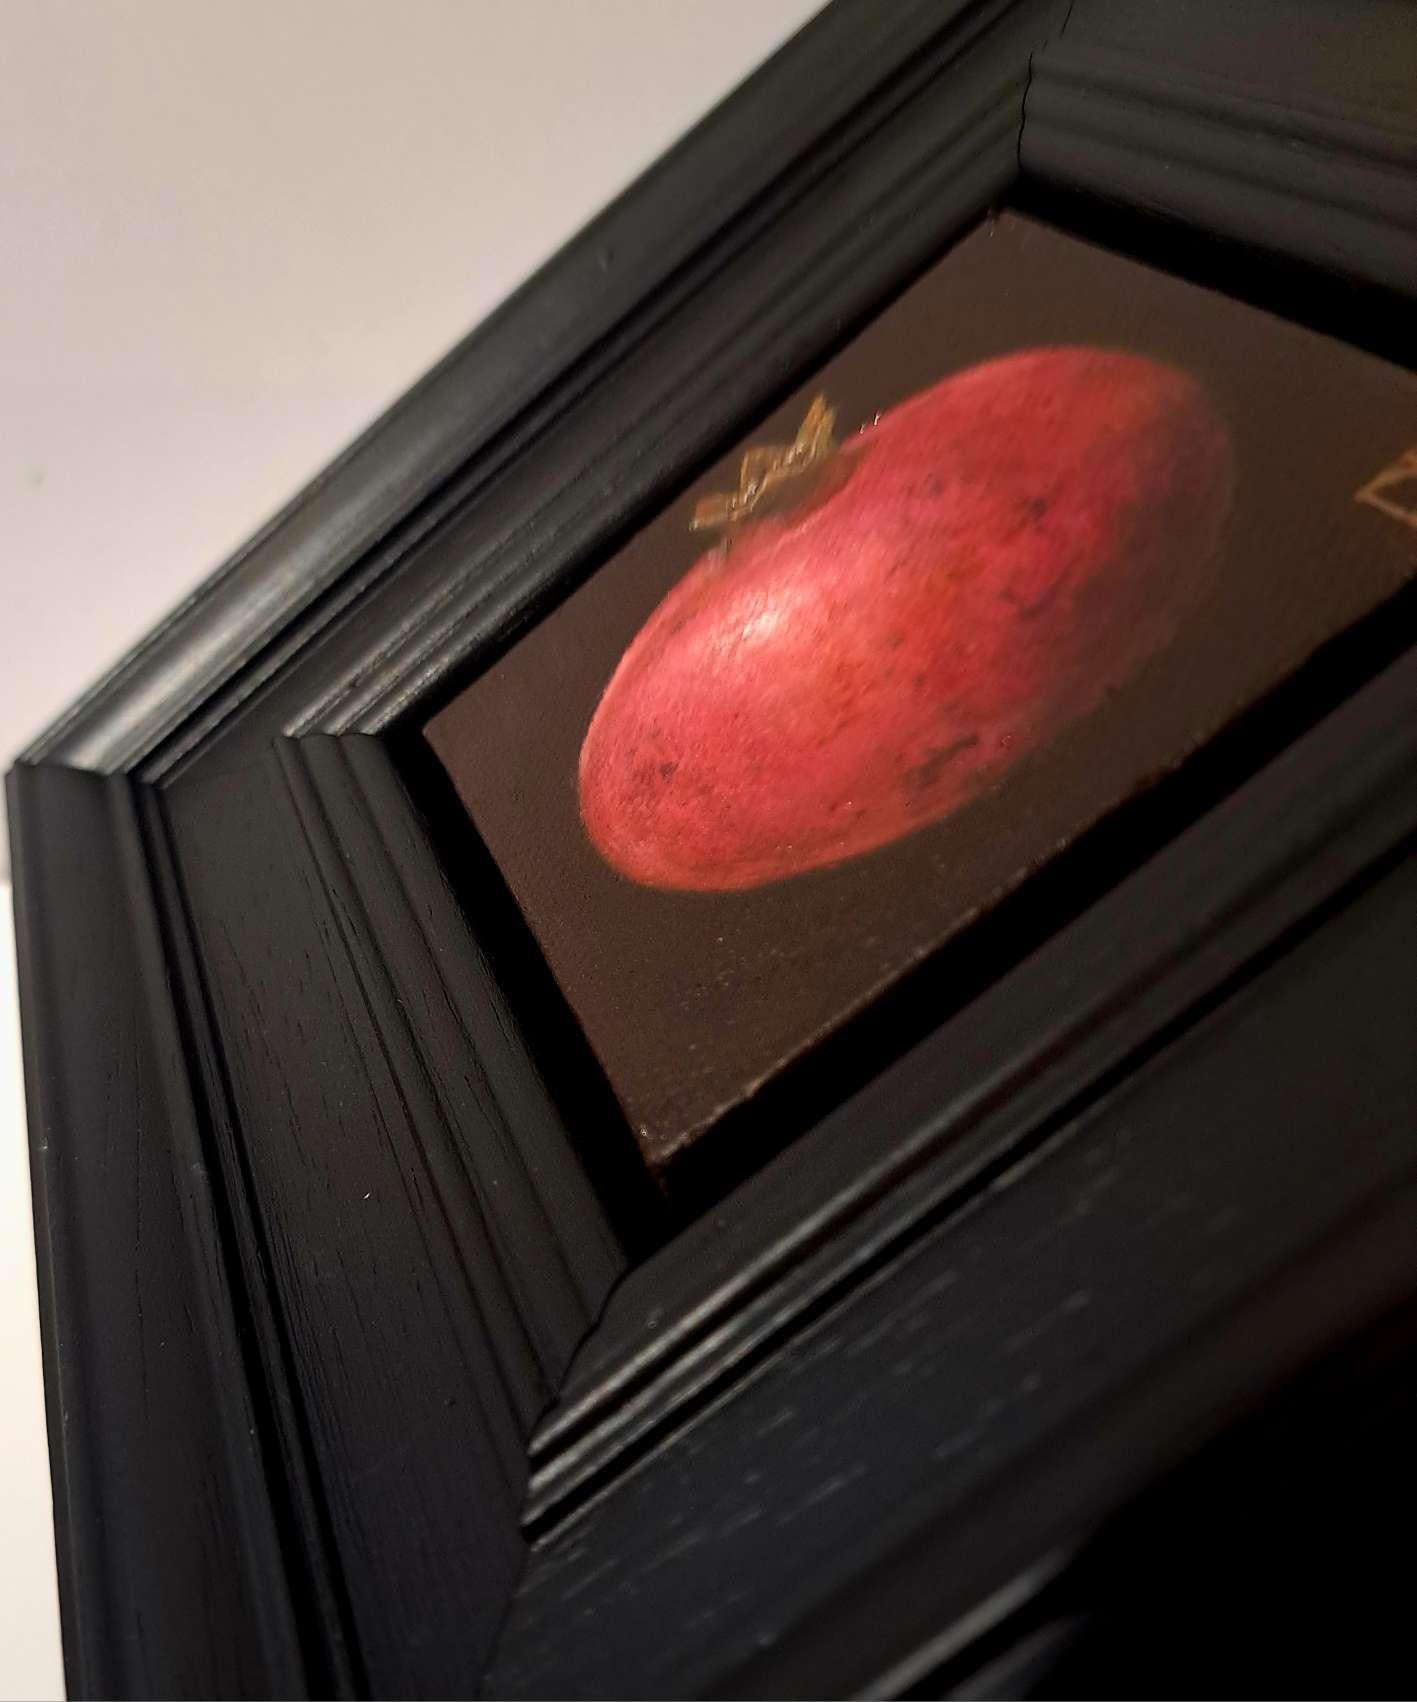 Pocket Pinky Red Pomegranate, Baroque Still Life, fruit - Realist Painting by Dani Humberstone